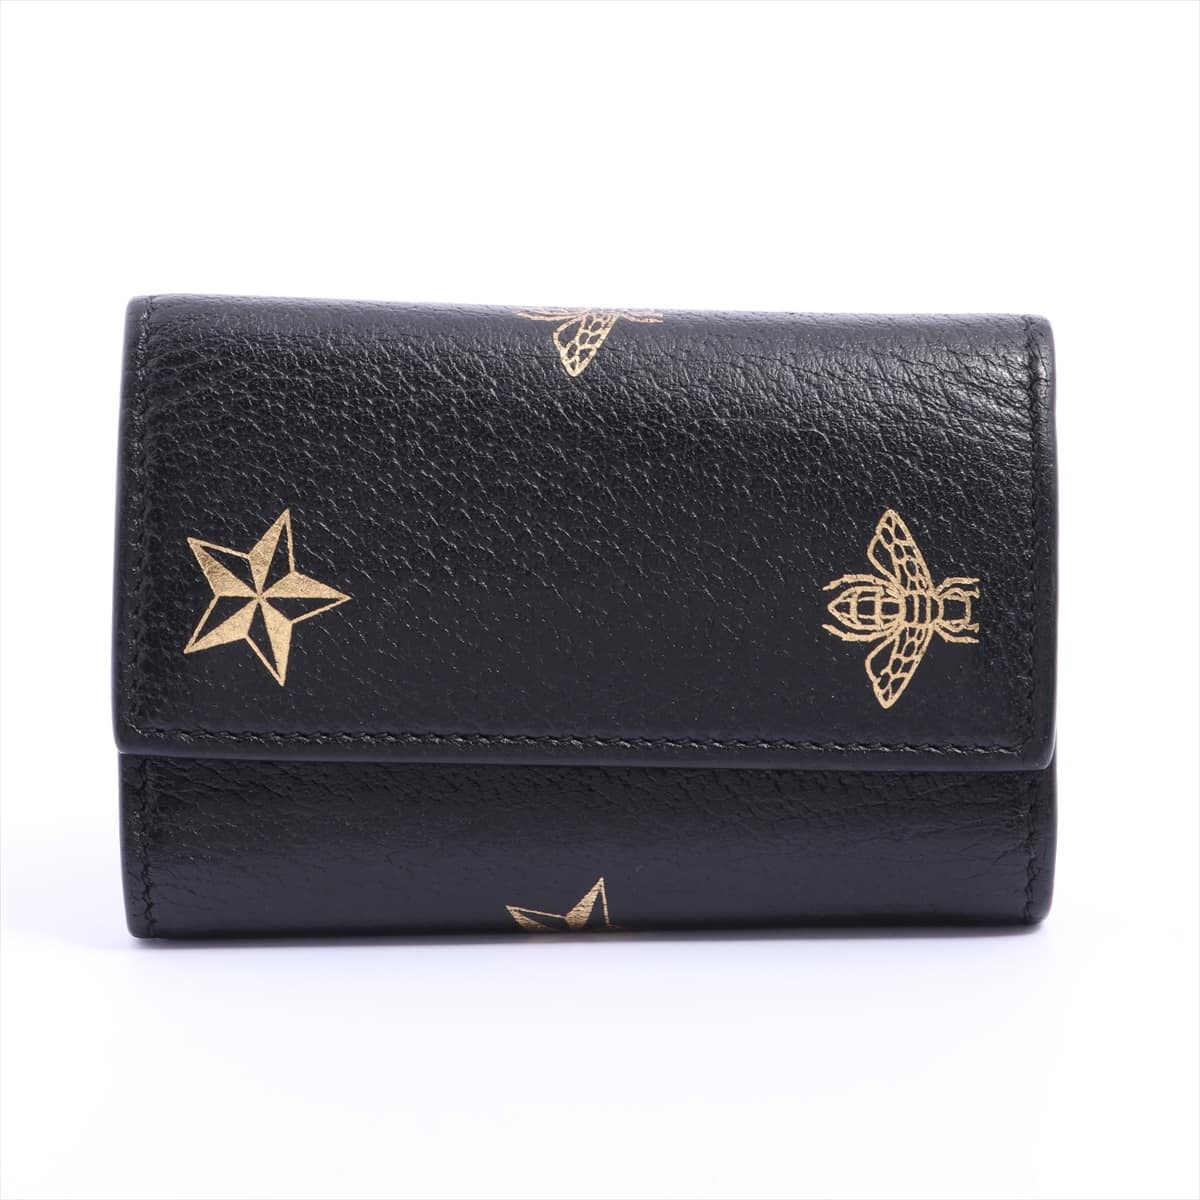 Gucci Bee & Star Leather Key Case Black 495071